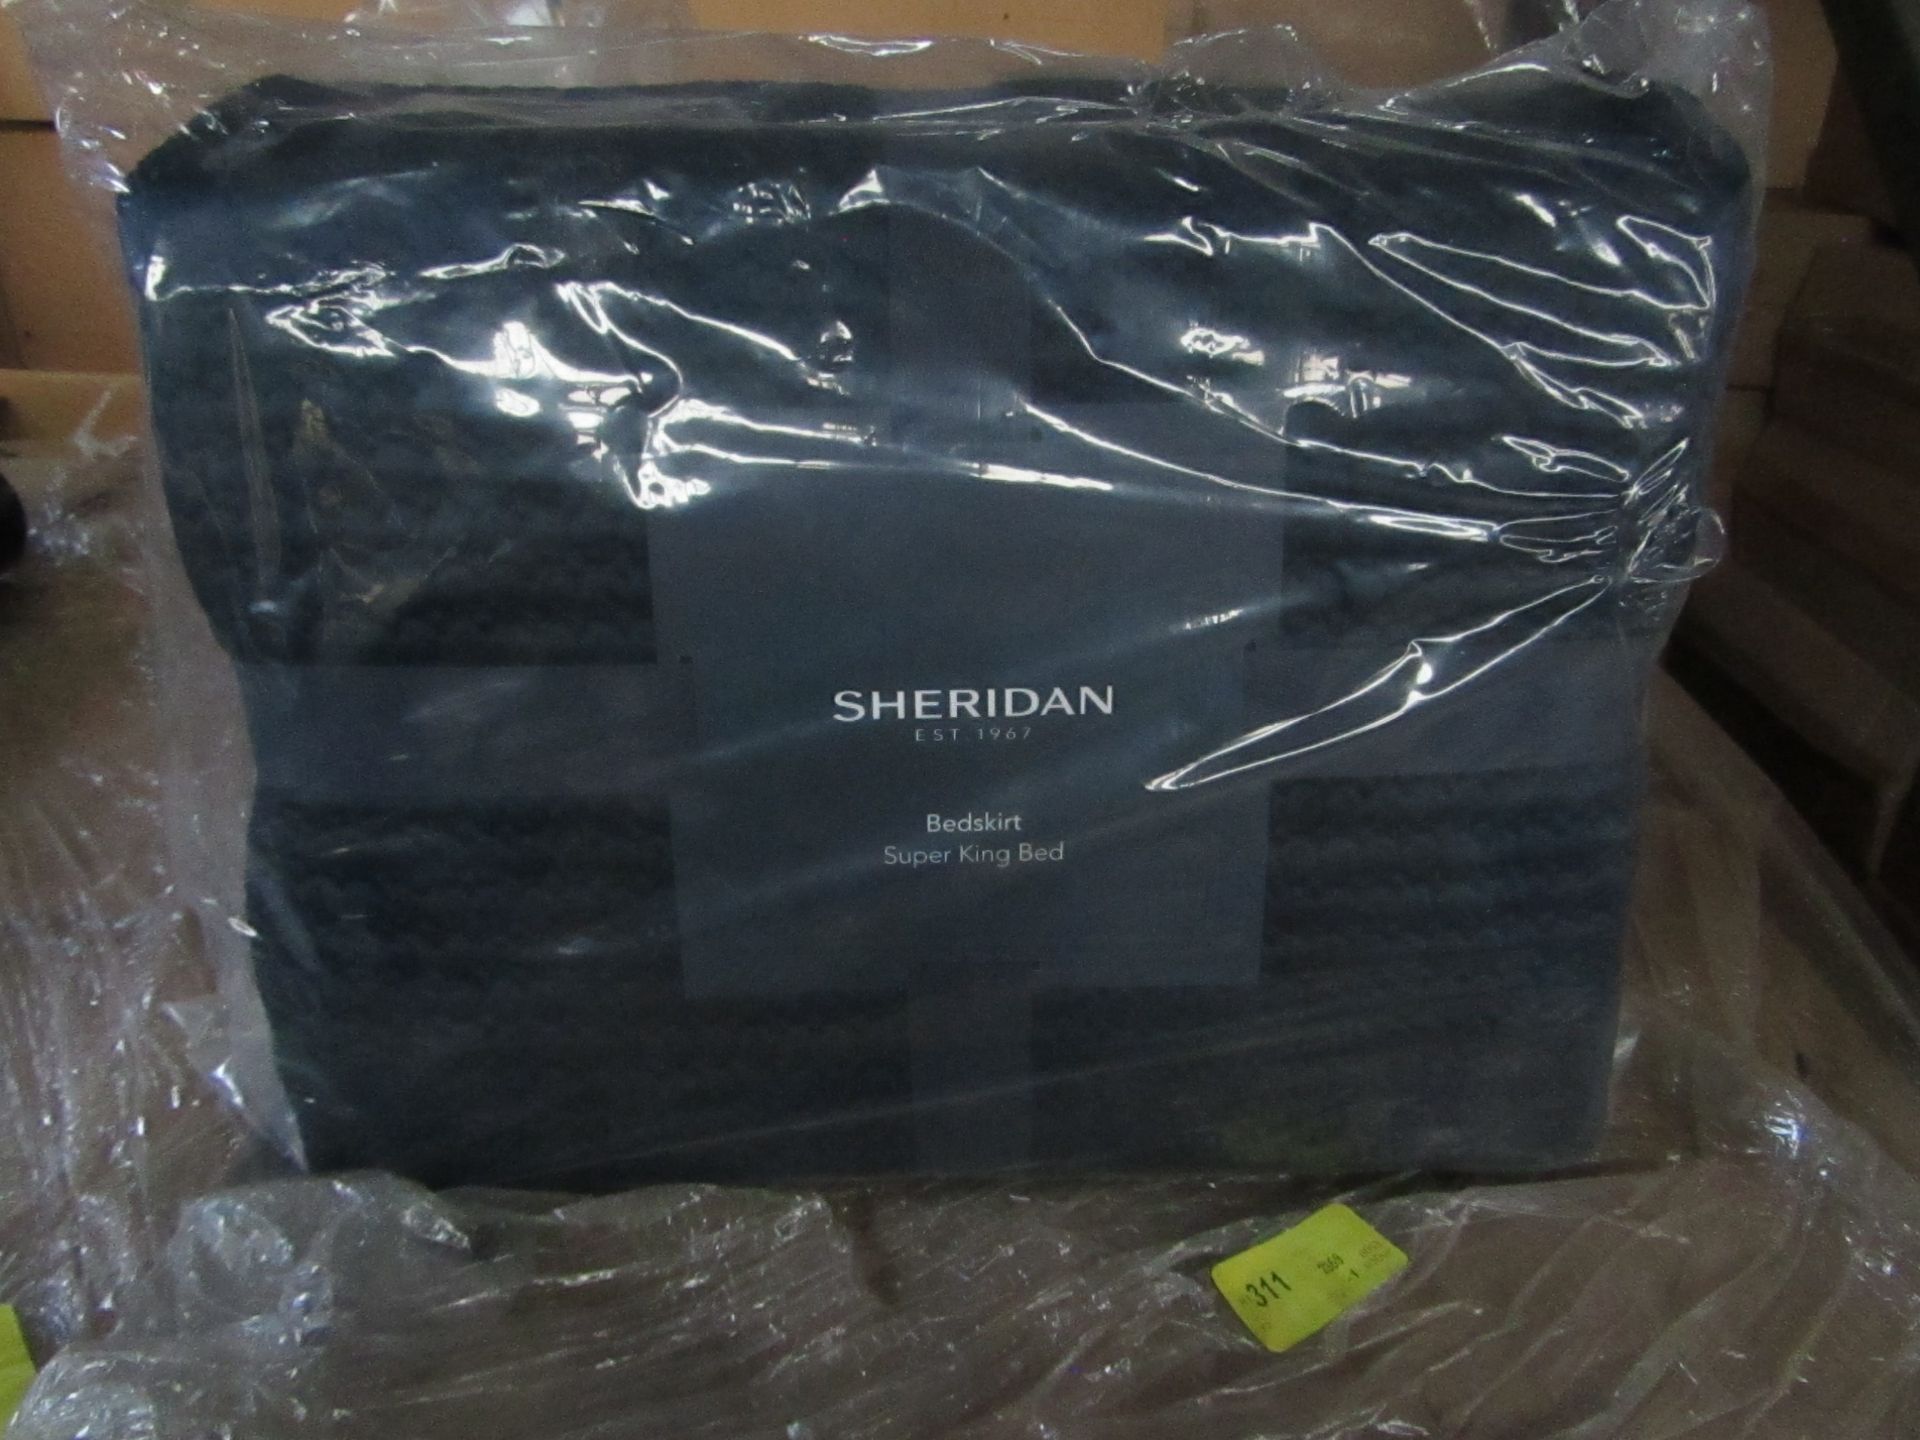 3x Sheridan - Midnight Super King Sized Bed Skirt - New & Packaged. RRP œ75.